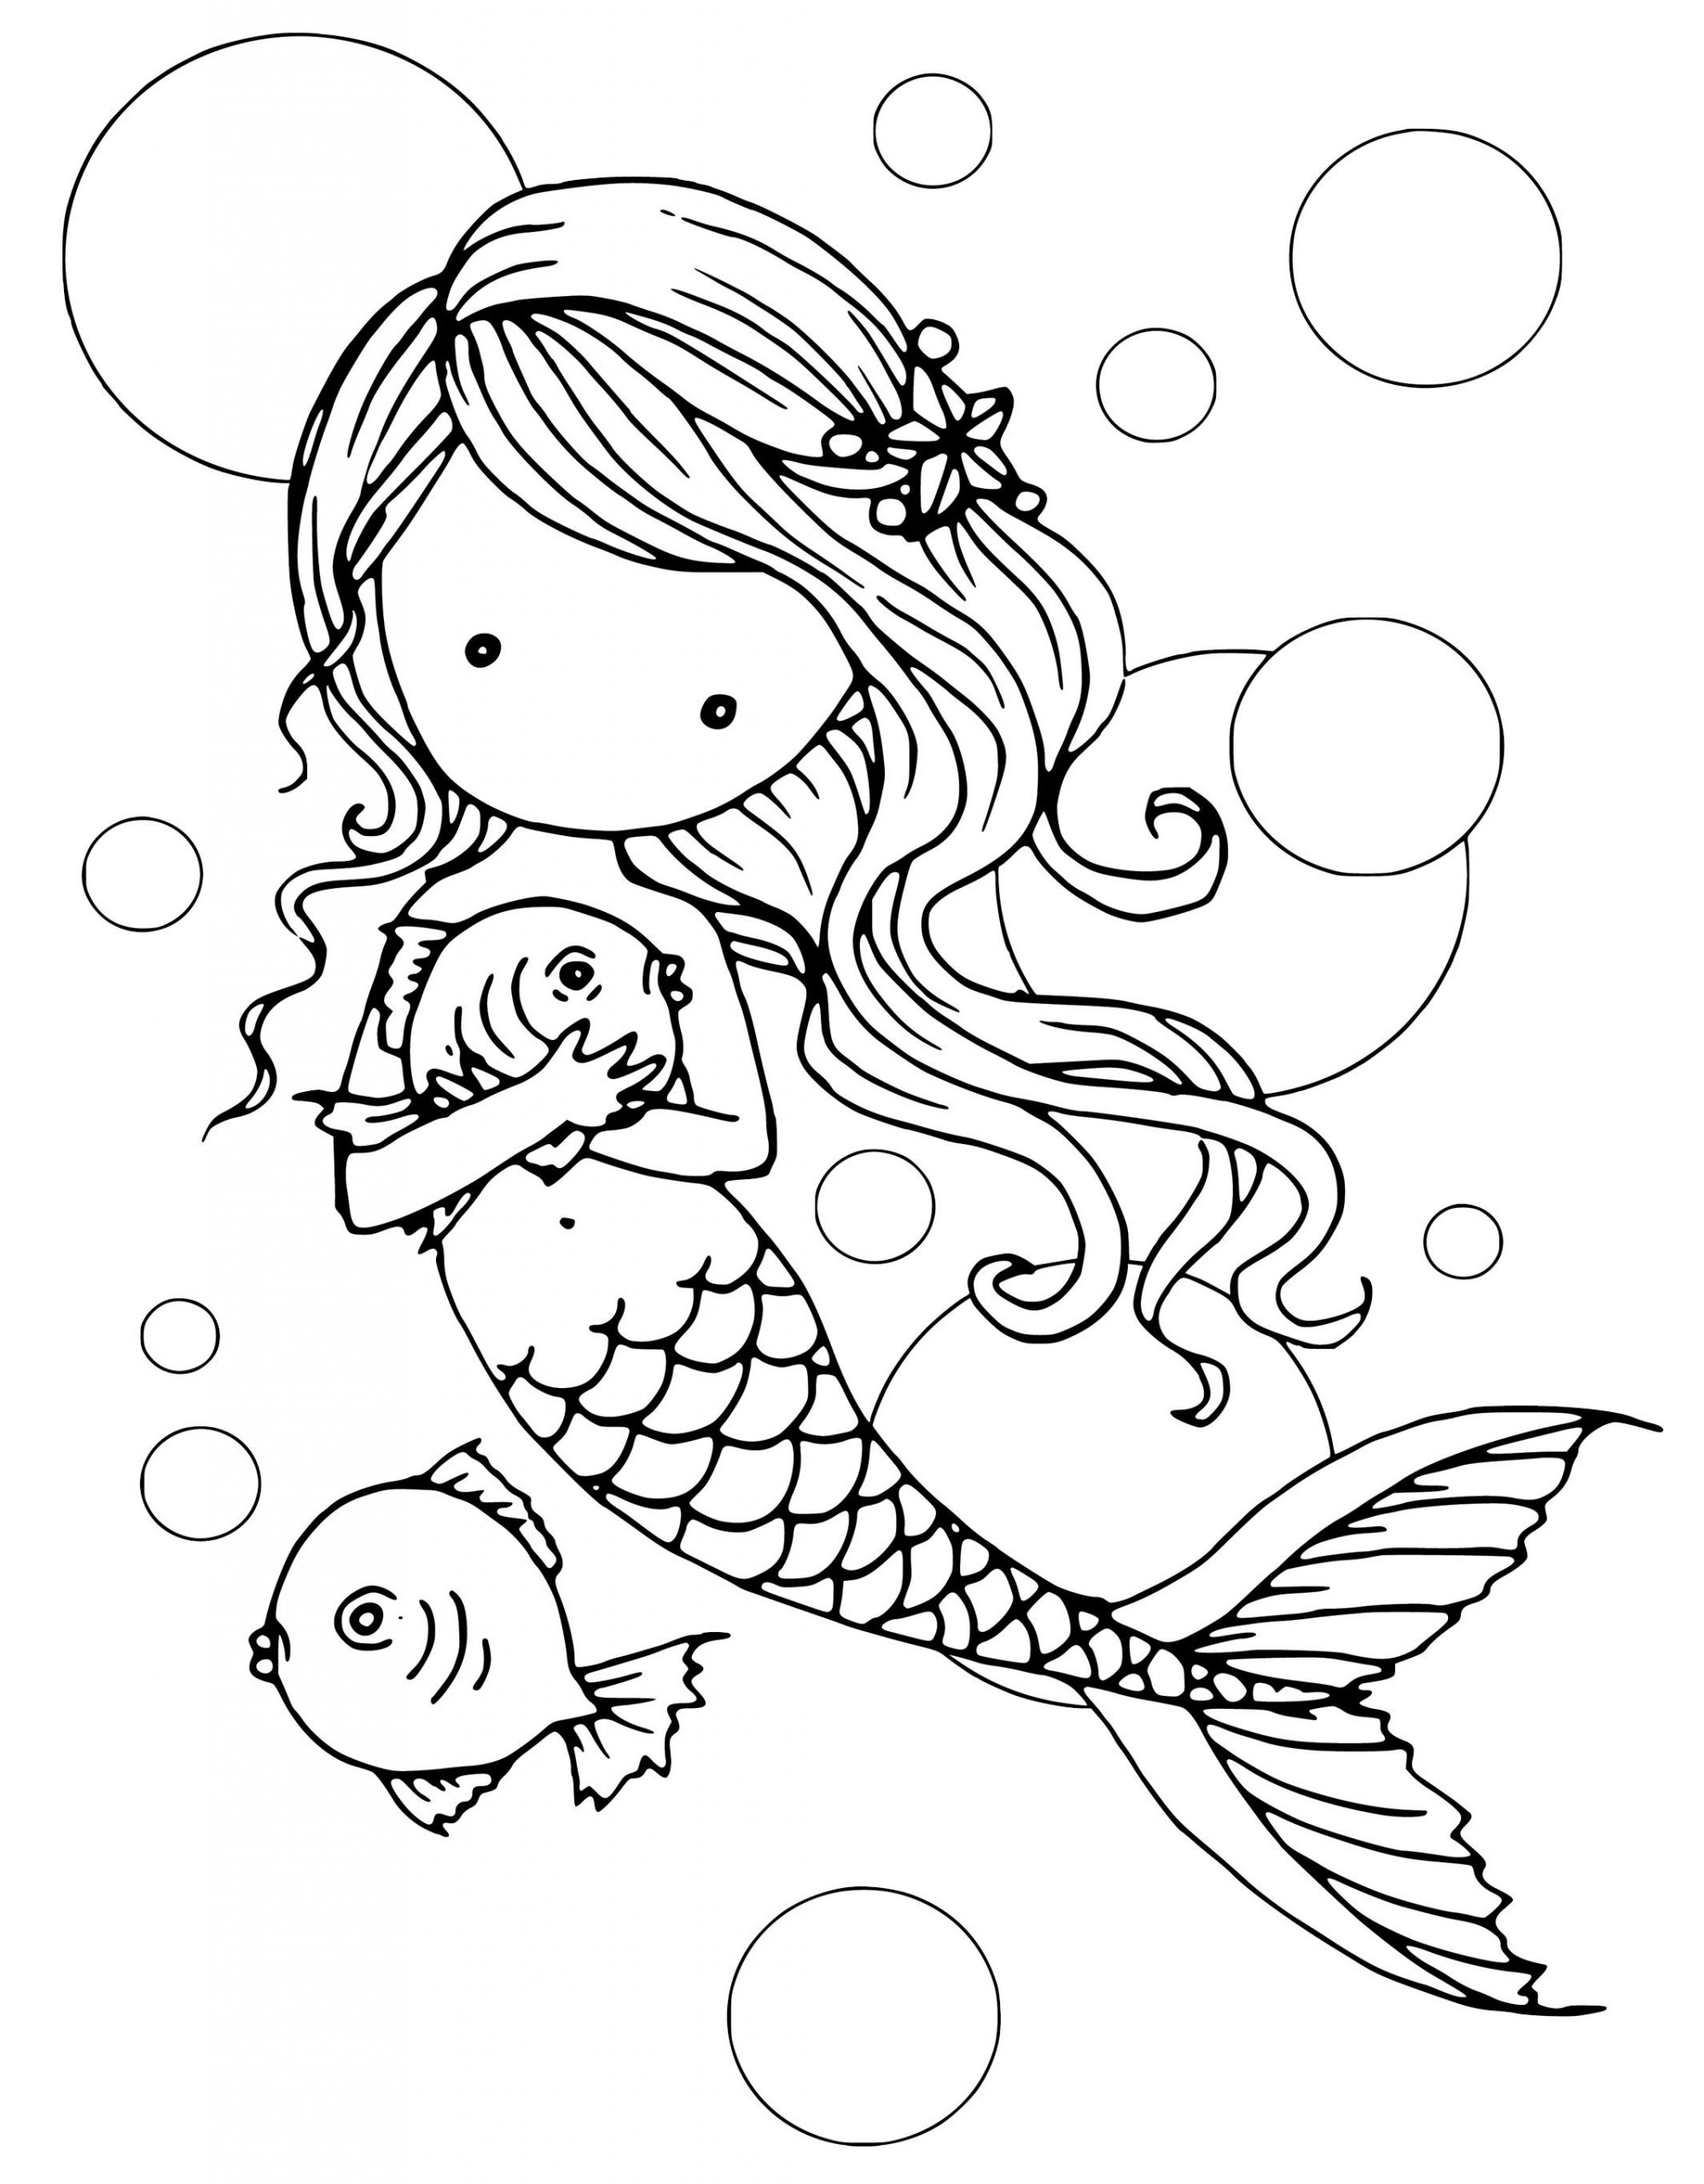 The Little Mermaid Coloring Pages Free To Print Printable For Kids Ursula –  Stephenbenedictdyson